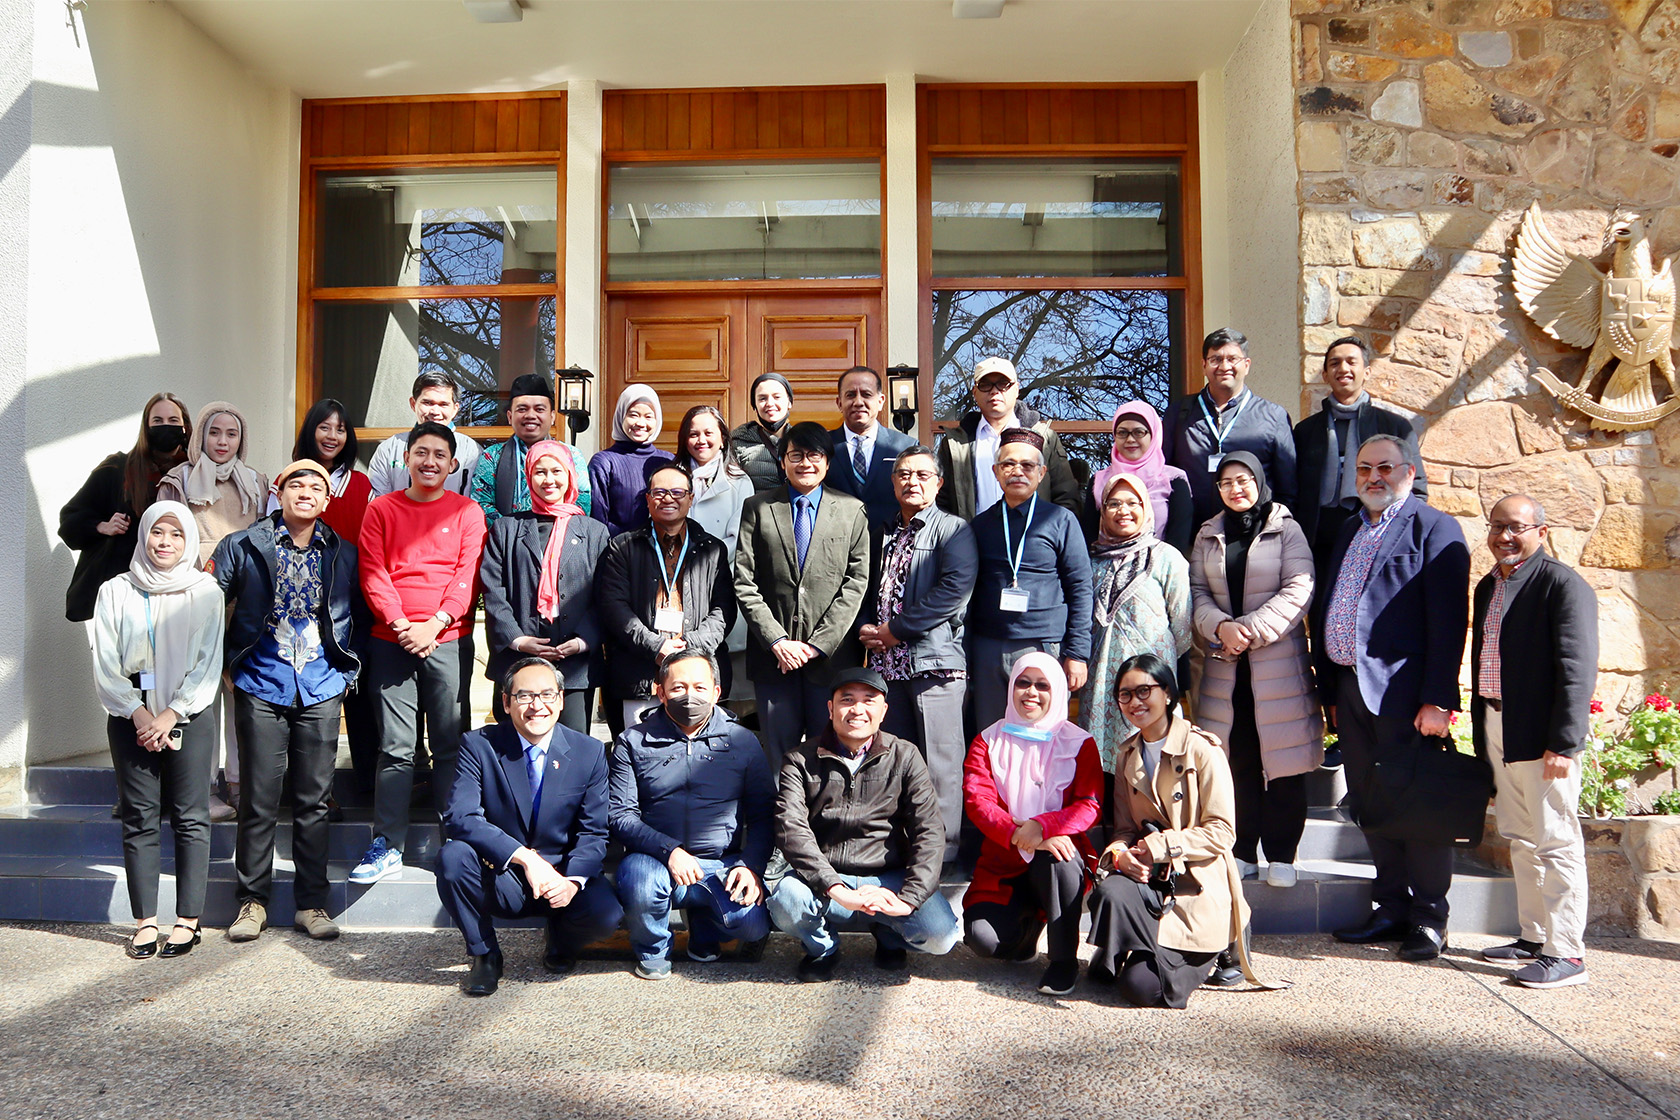 A group photo of participants with Siswo Pramono, Ambassador of Indonesia to Australia, taken in front of the Indonesian Embassy in Canberra building